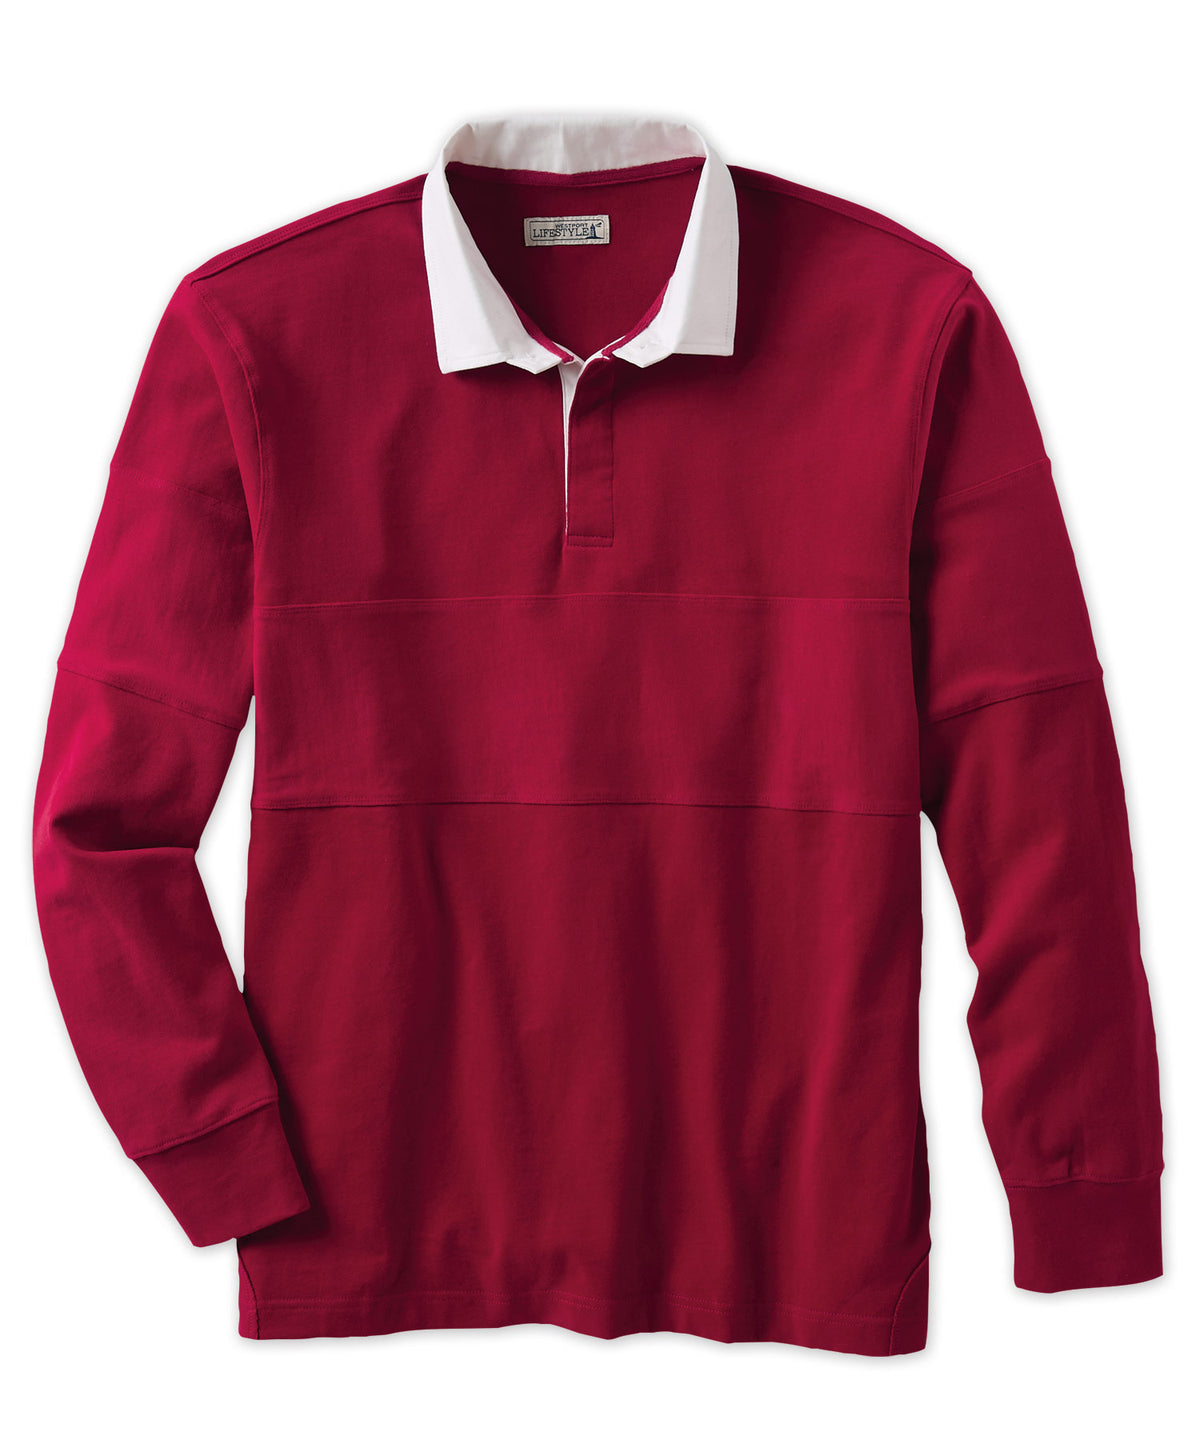 Westport Lifestyle Solid Performance Rugby Shirt, Men's Big & Tall